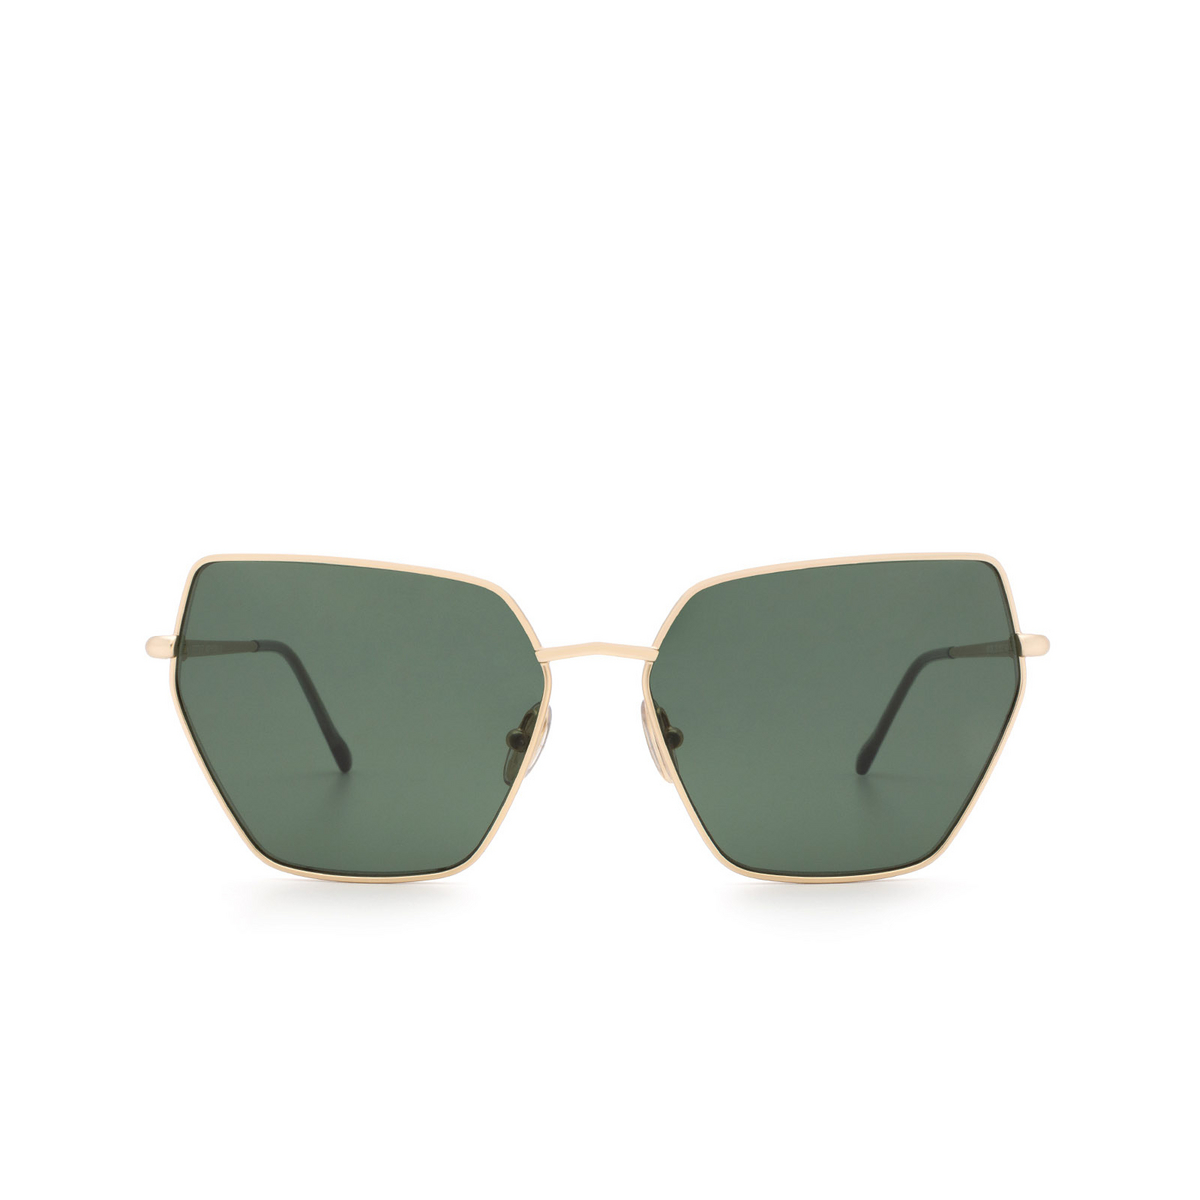 Sportmax® Irregular Sunglasses: SM0036 color Gold 32N - front view.